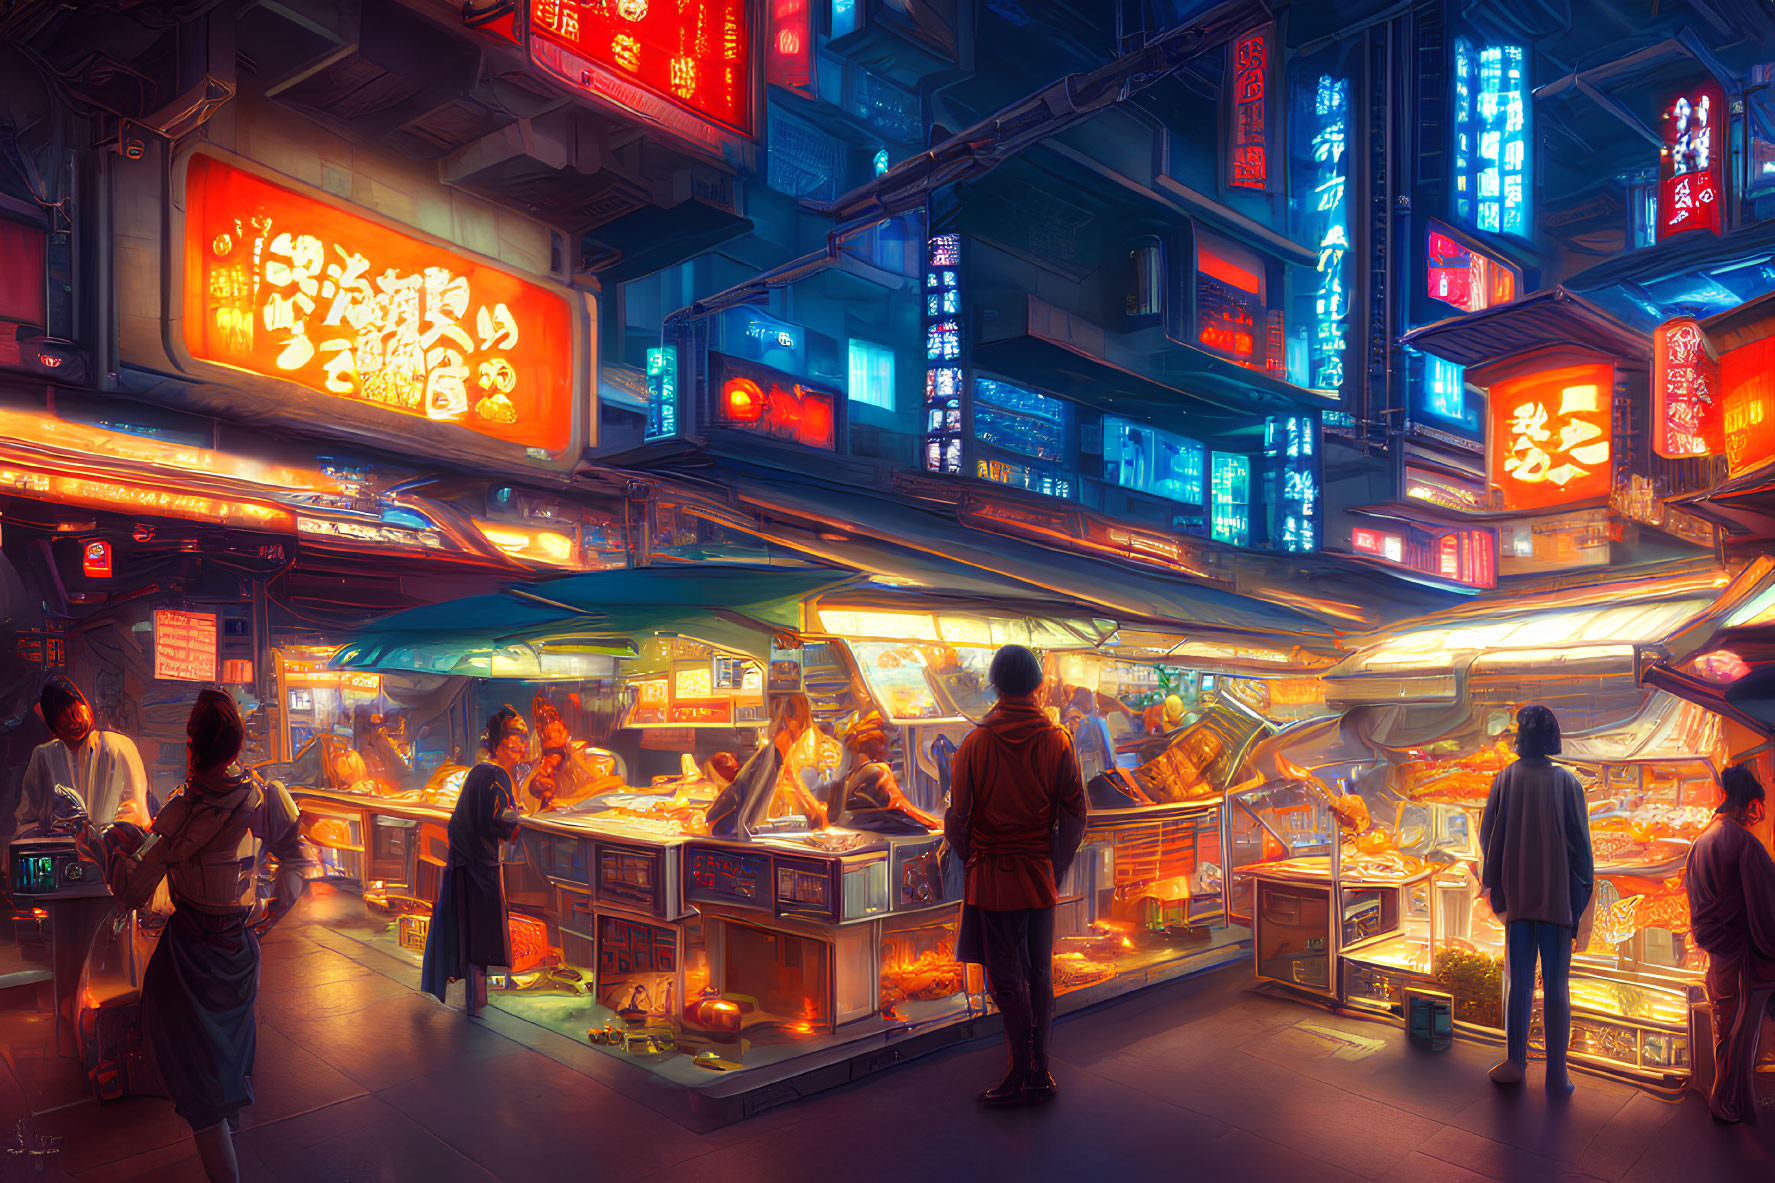 Colorful night market with neon signs and bustling stalls